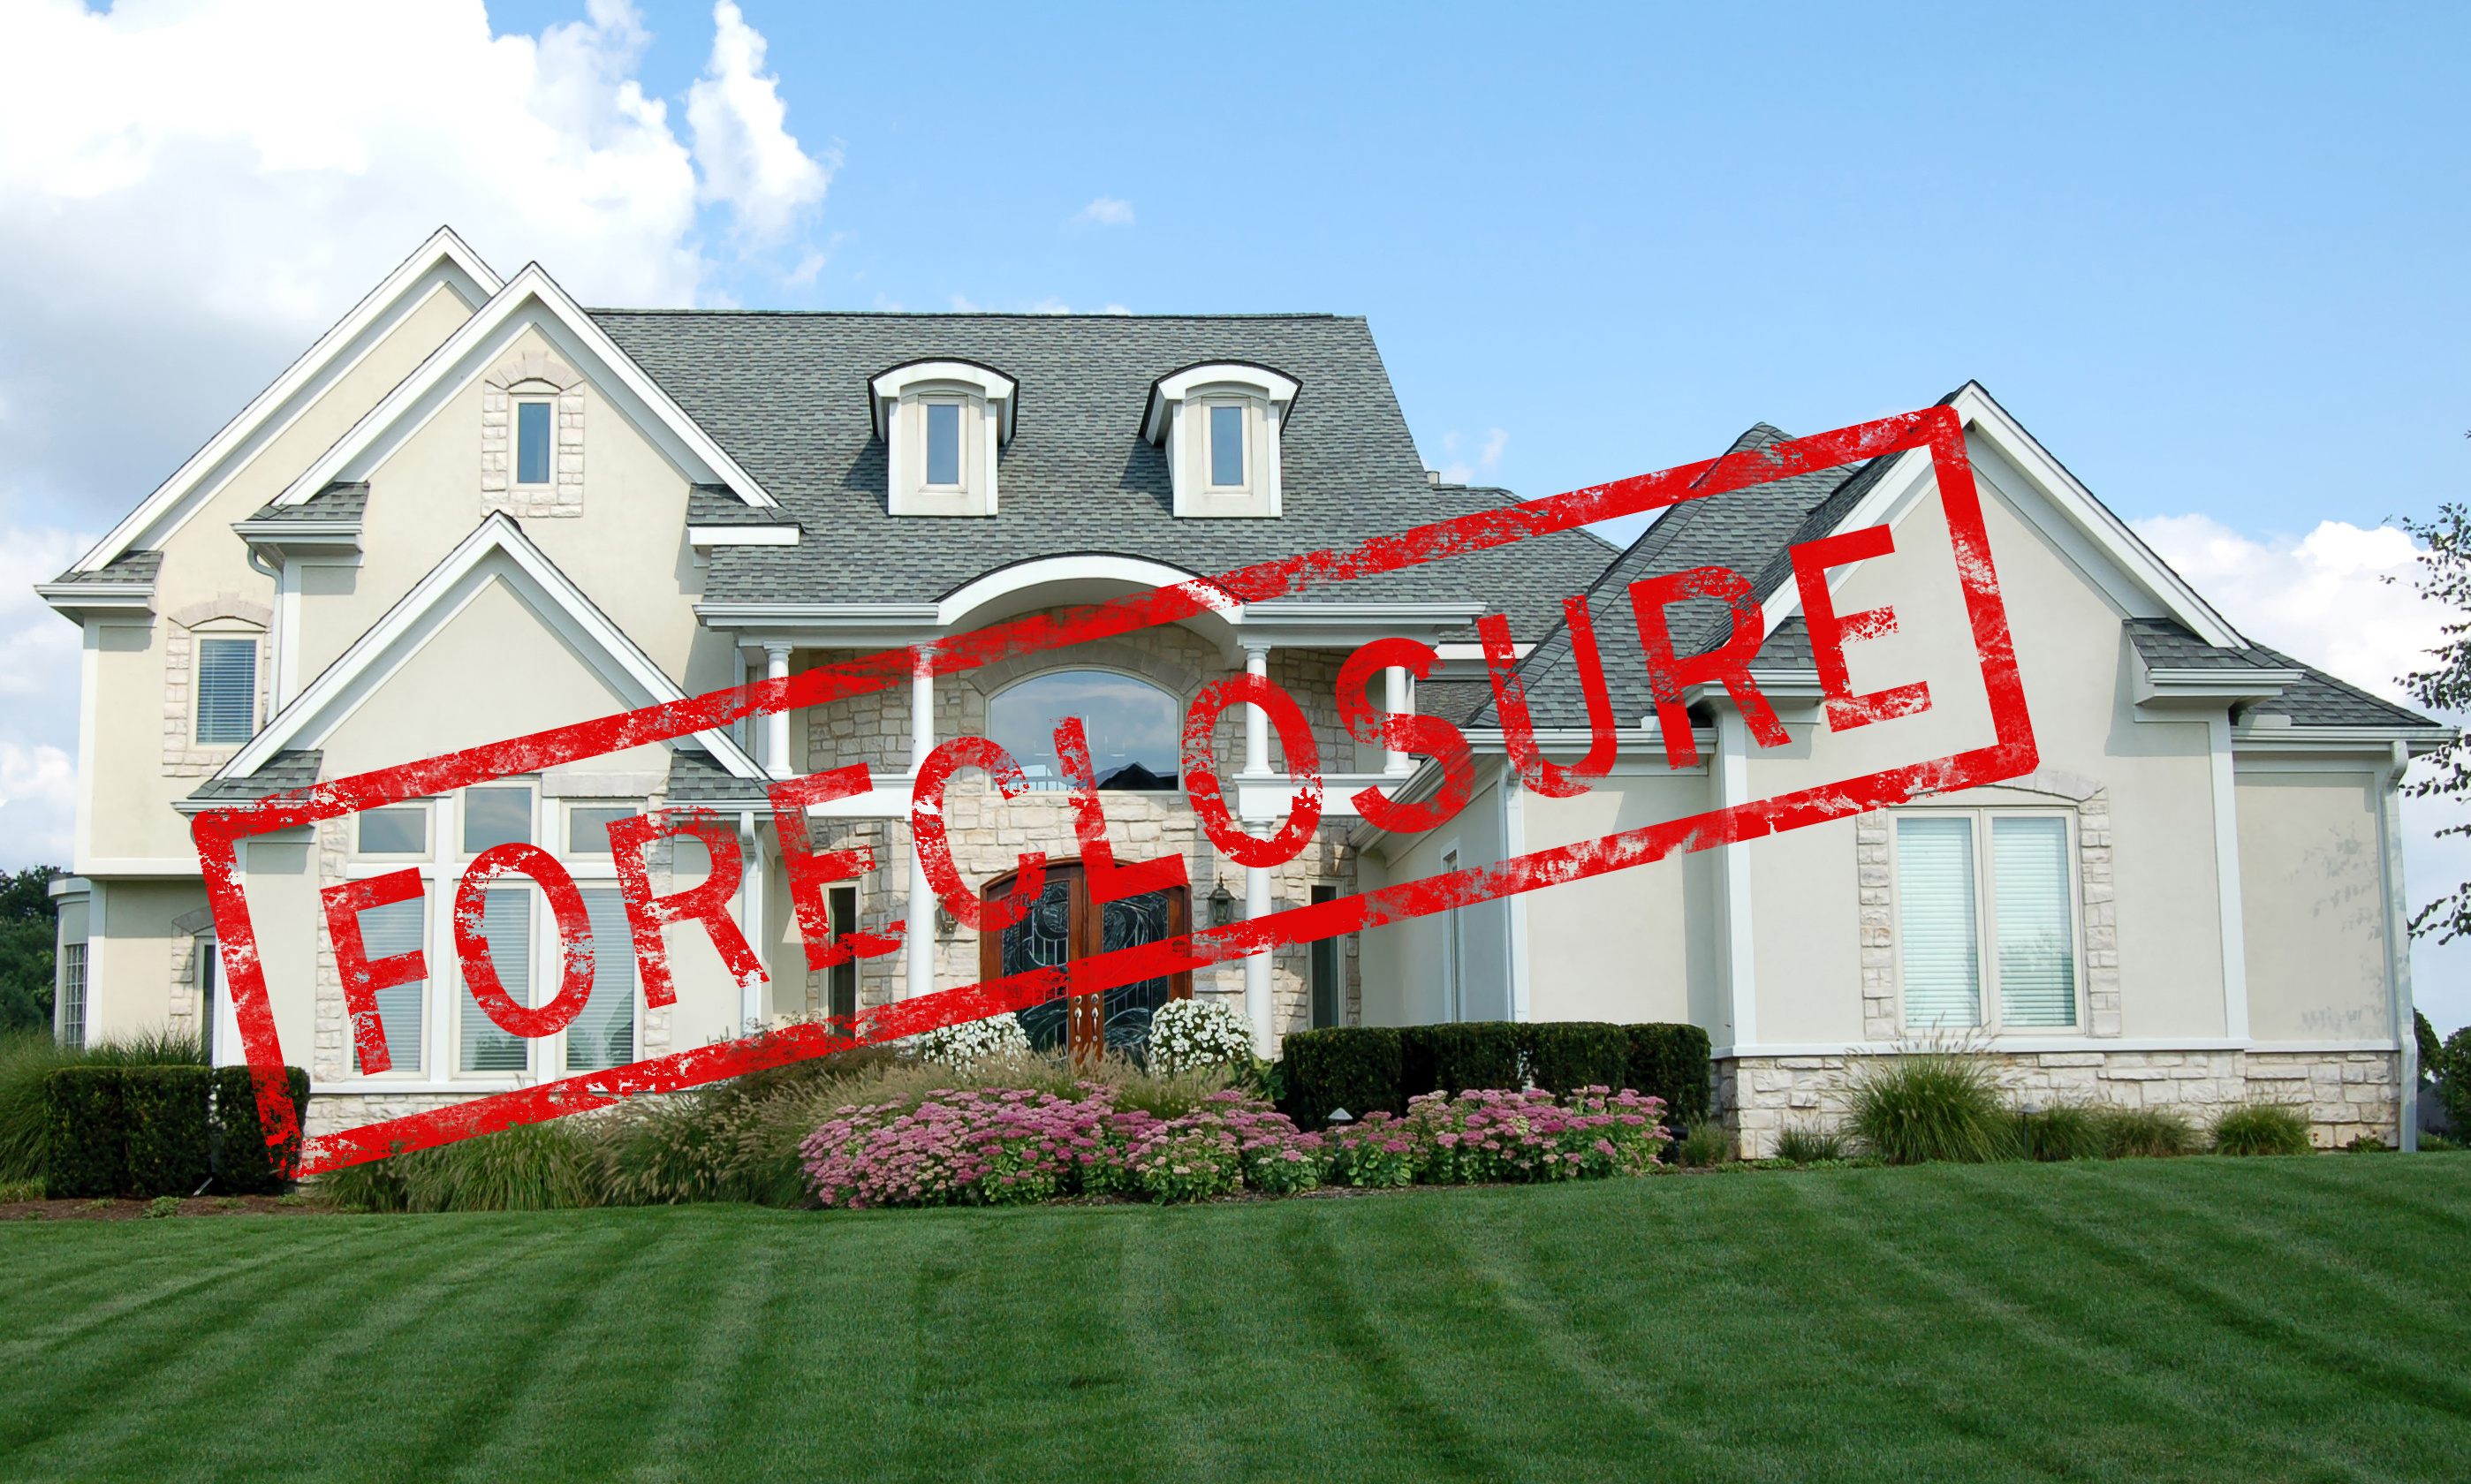 Call Premier Appraisals, Inc. to discuss valuations pertaining to Suffolk foreclosures